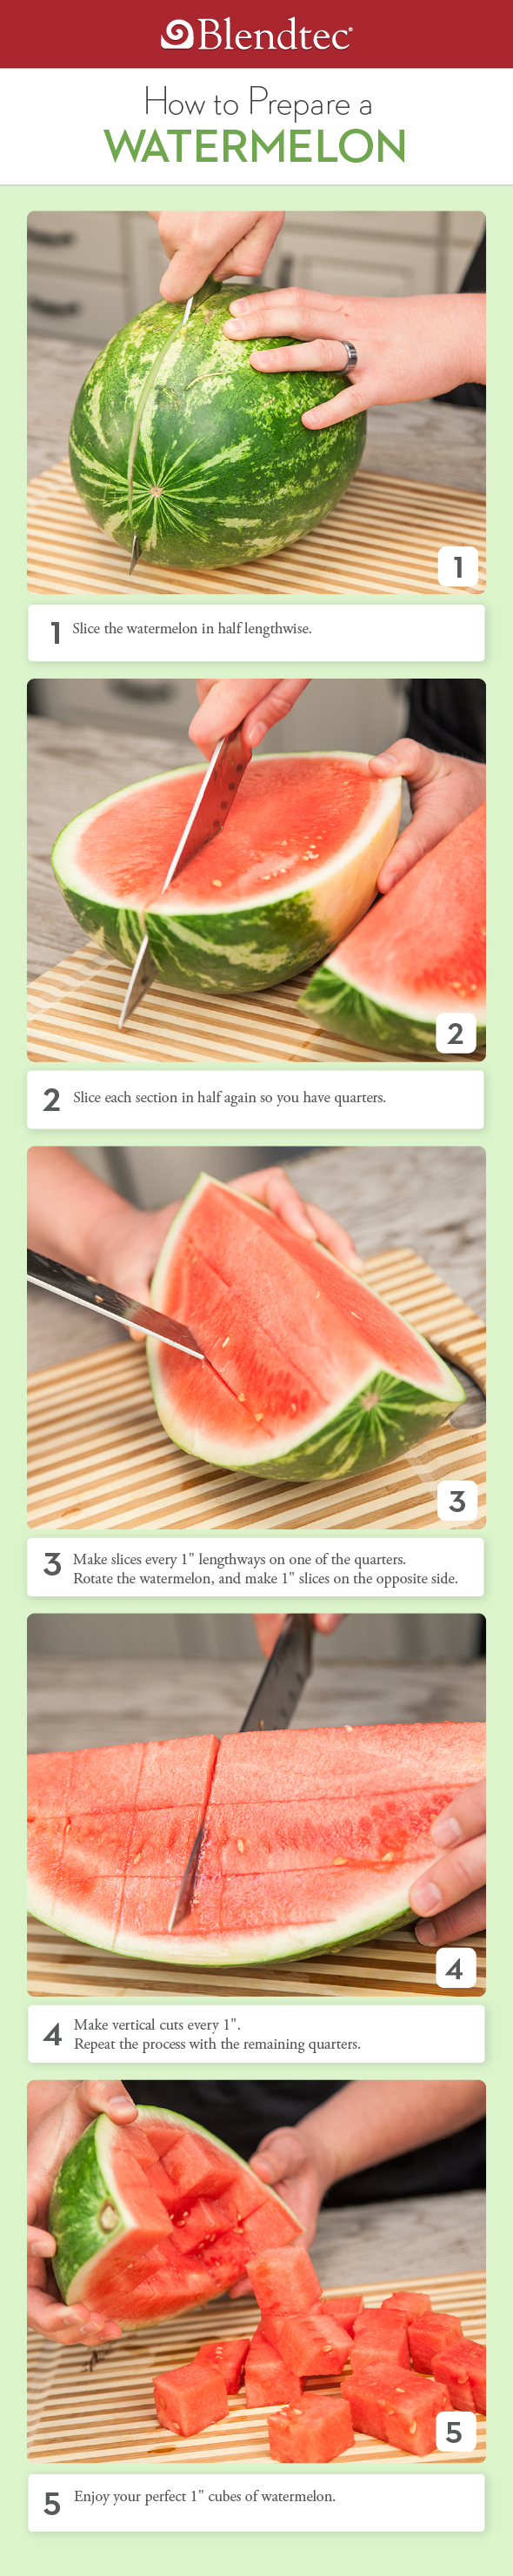 How to Cut a Watermelon Instructographic